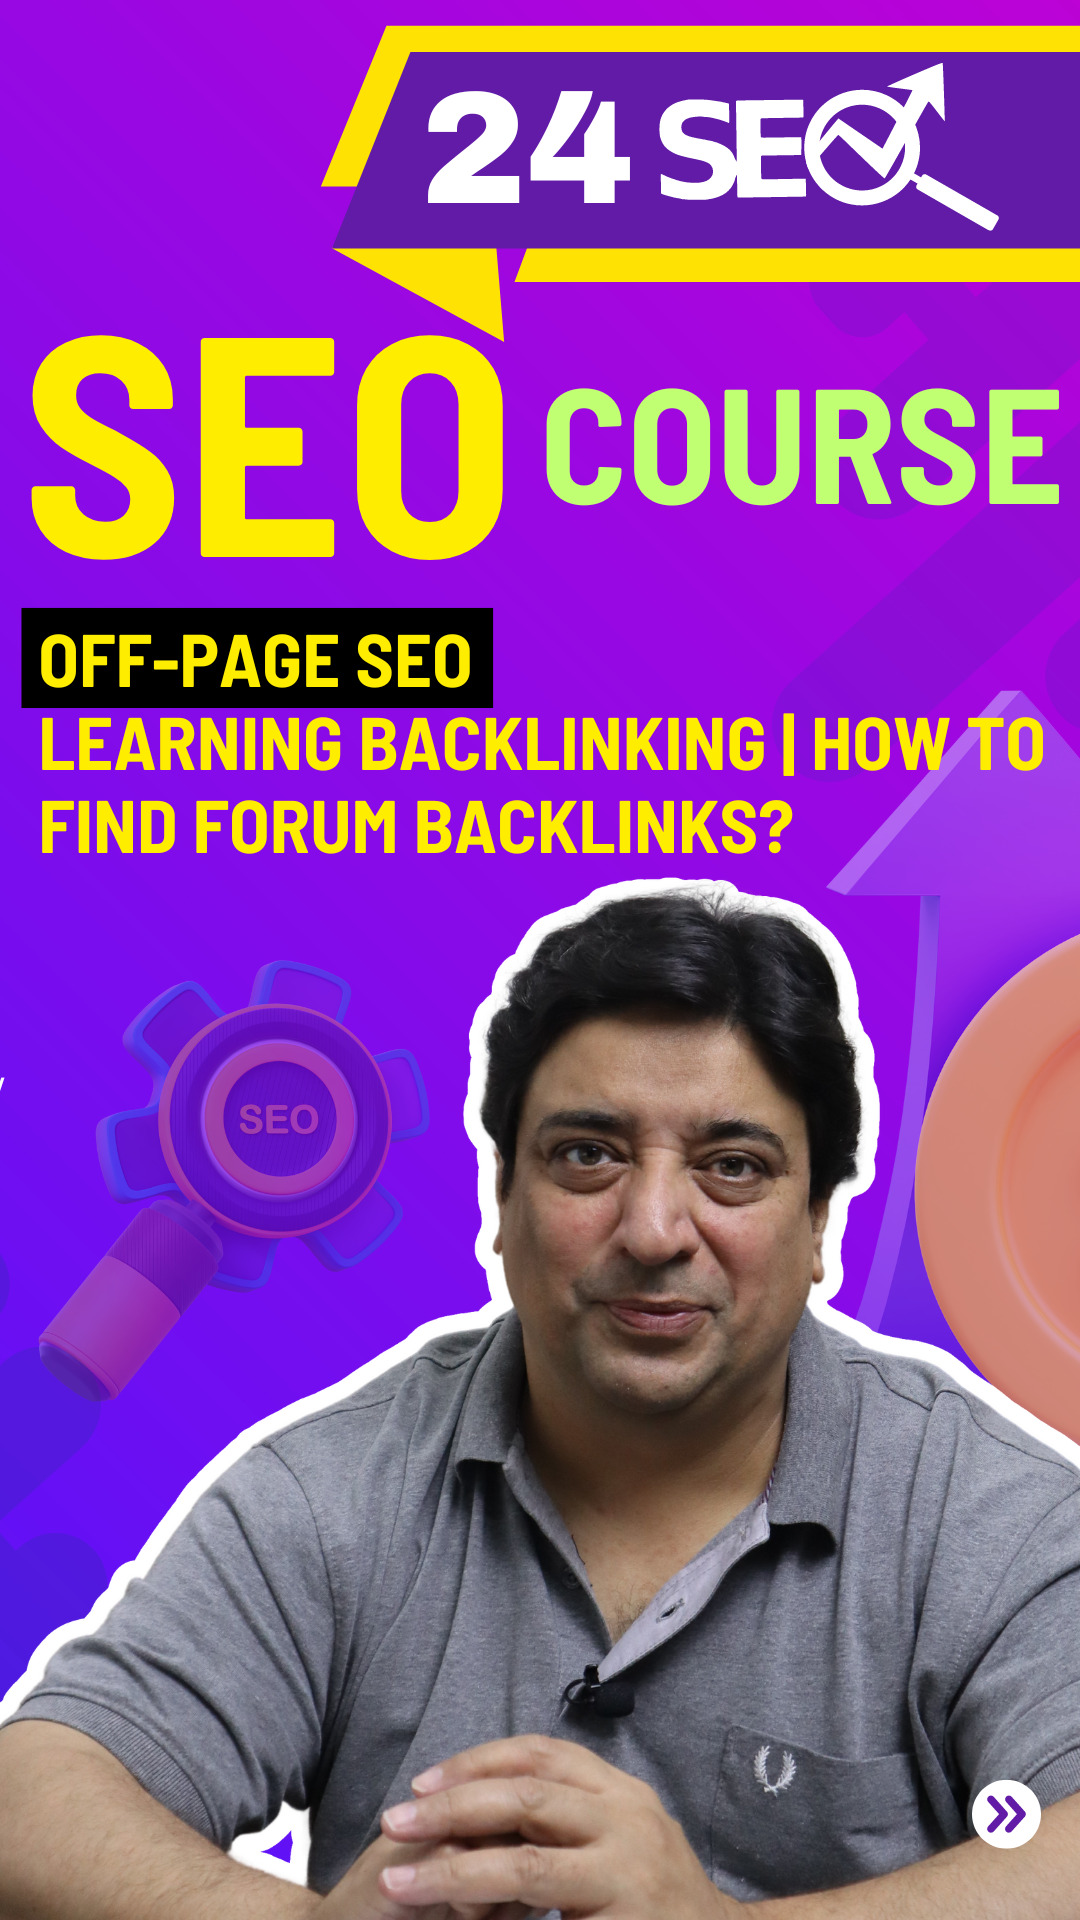 How to find forum backlinks